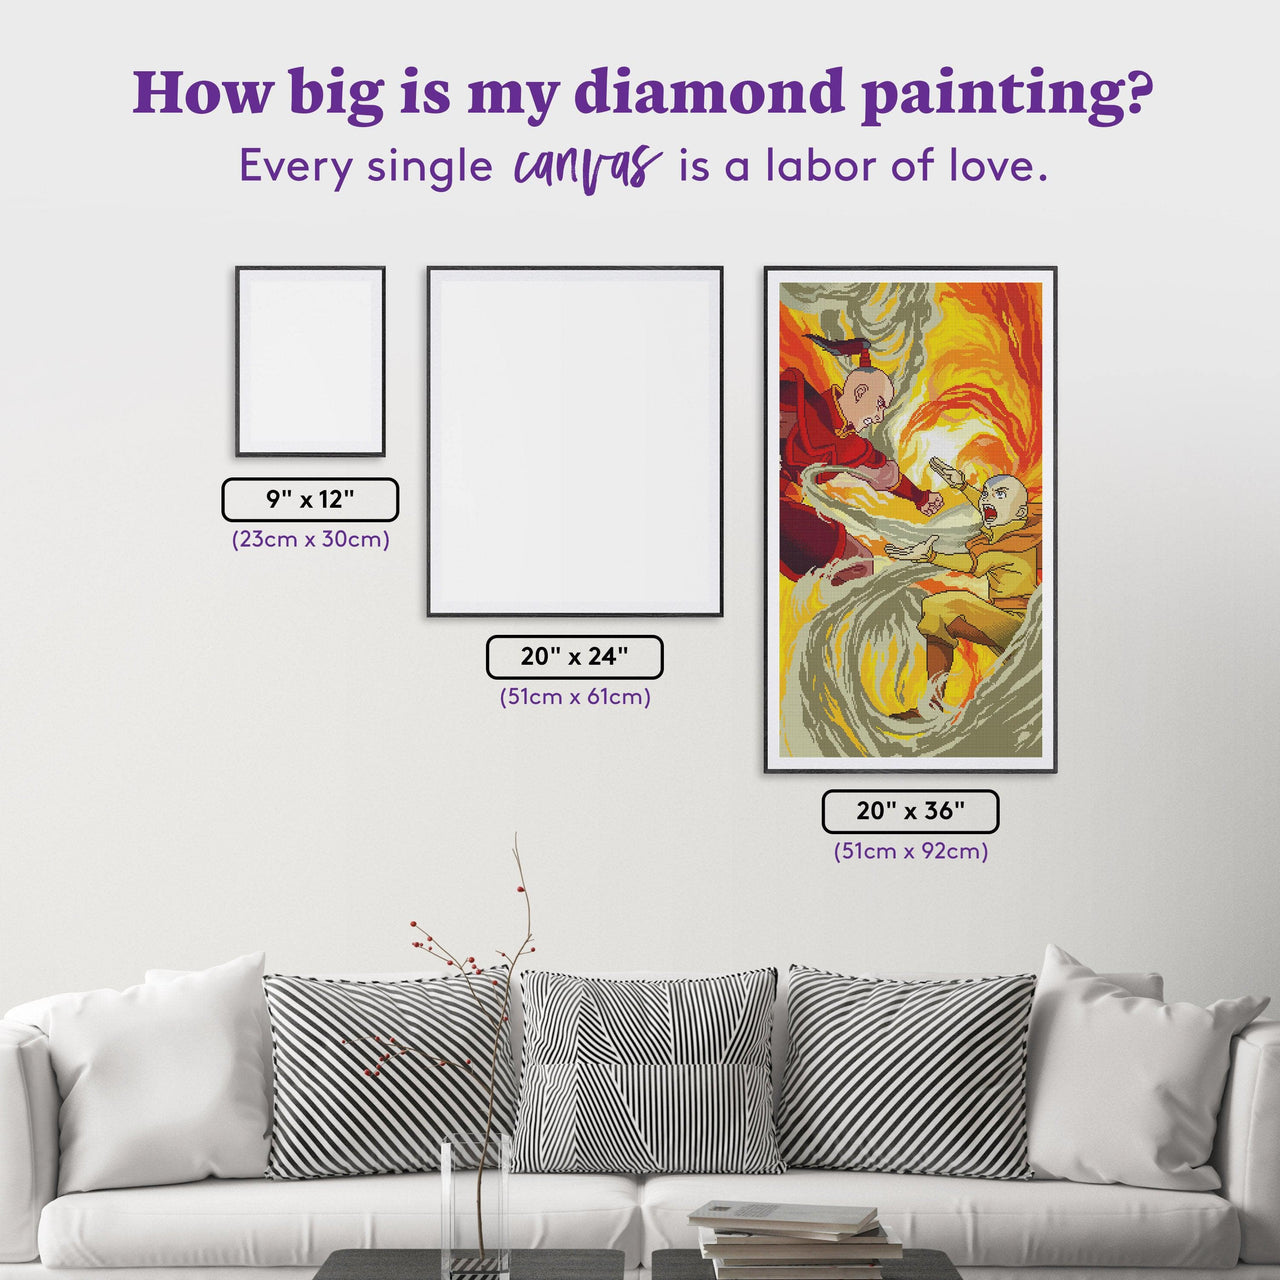 Diamond Painting Elemental Battle 20" x 36" (51cm x 92cm) / Square with 40 Colors including 3 ABs / 75,276